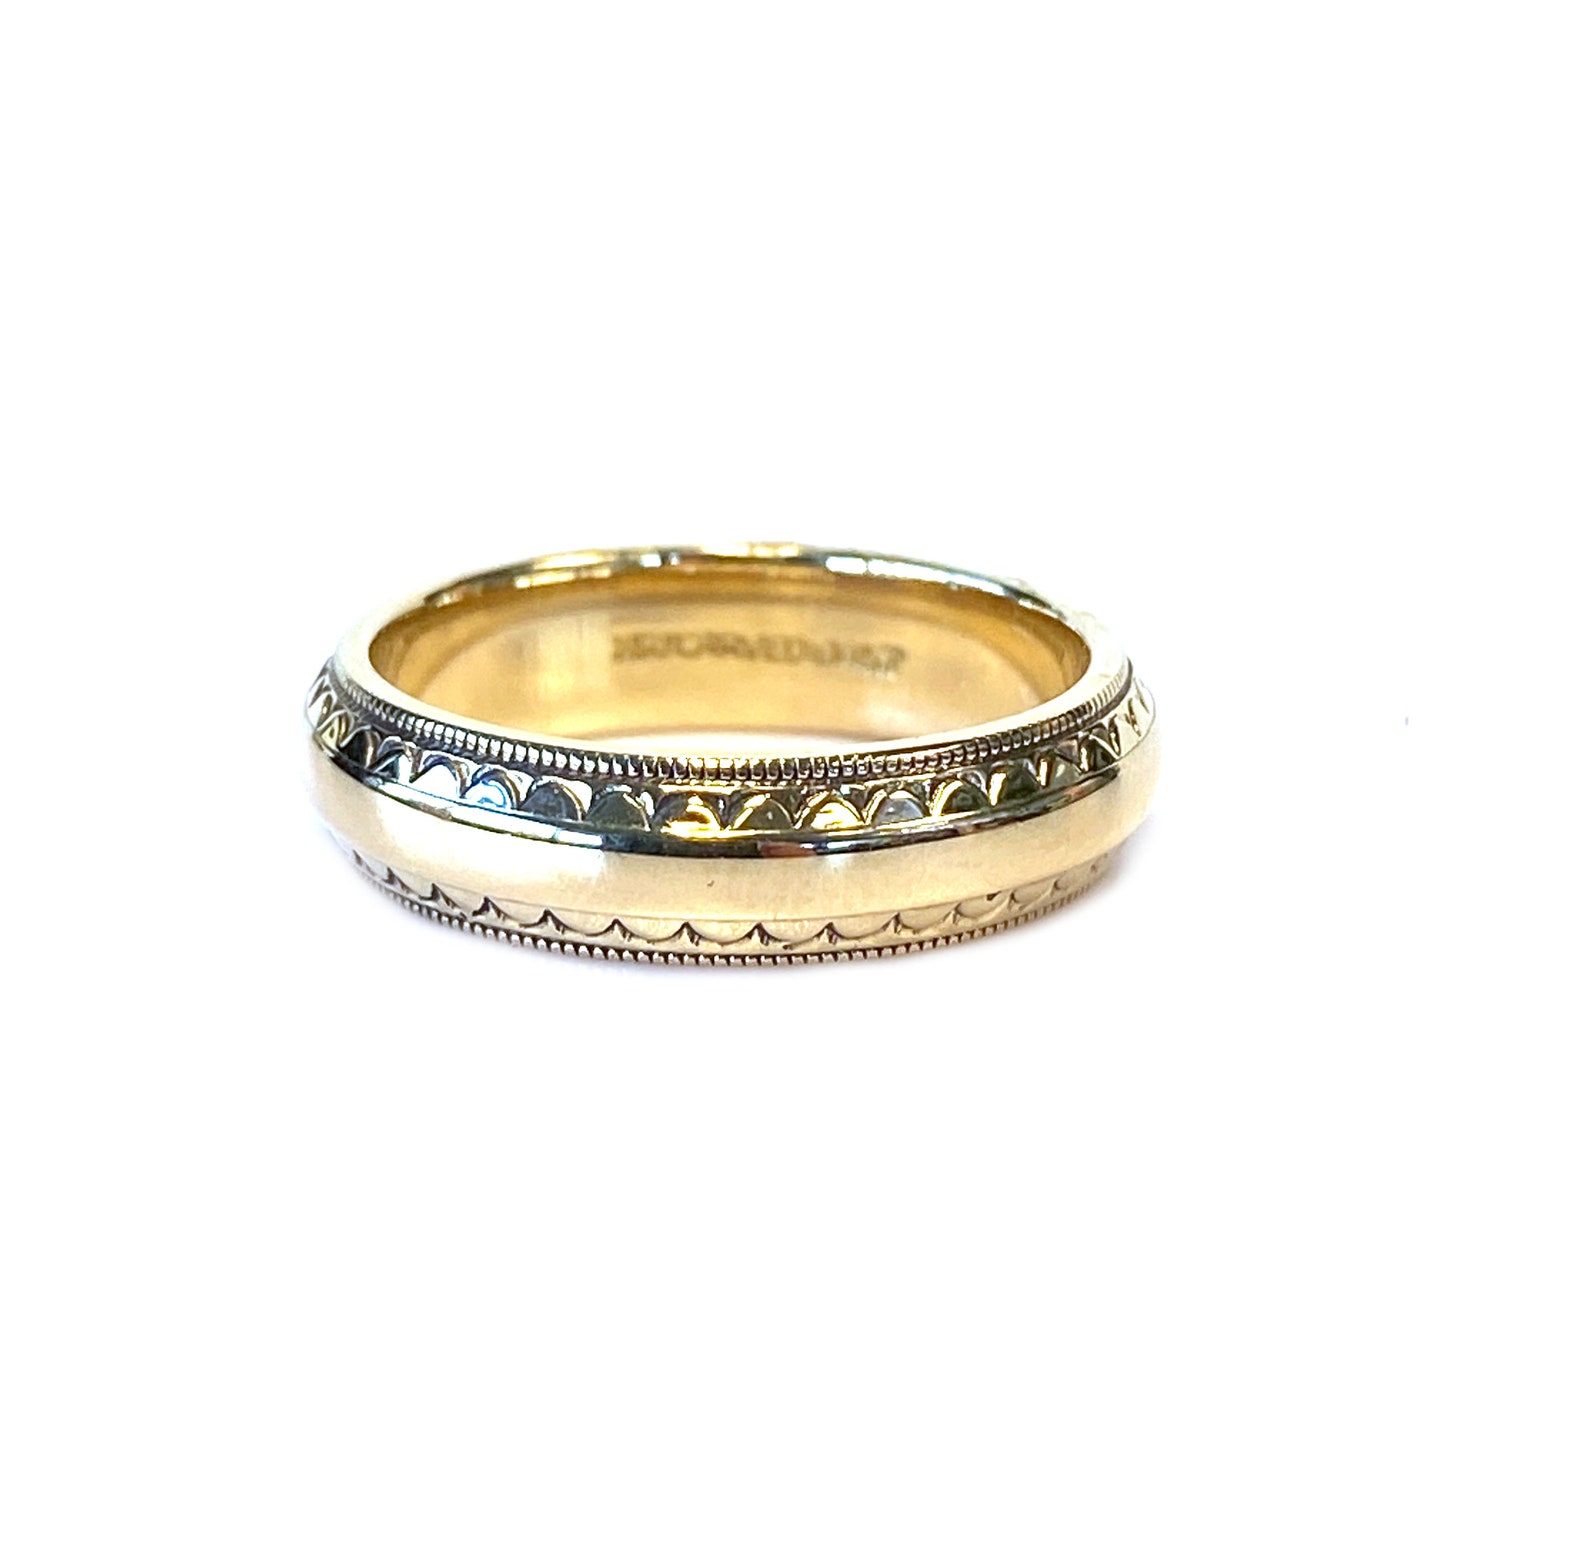 Vintage 14kt Yellow Gold Artcarved Wedding Band Size 6 Etsy